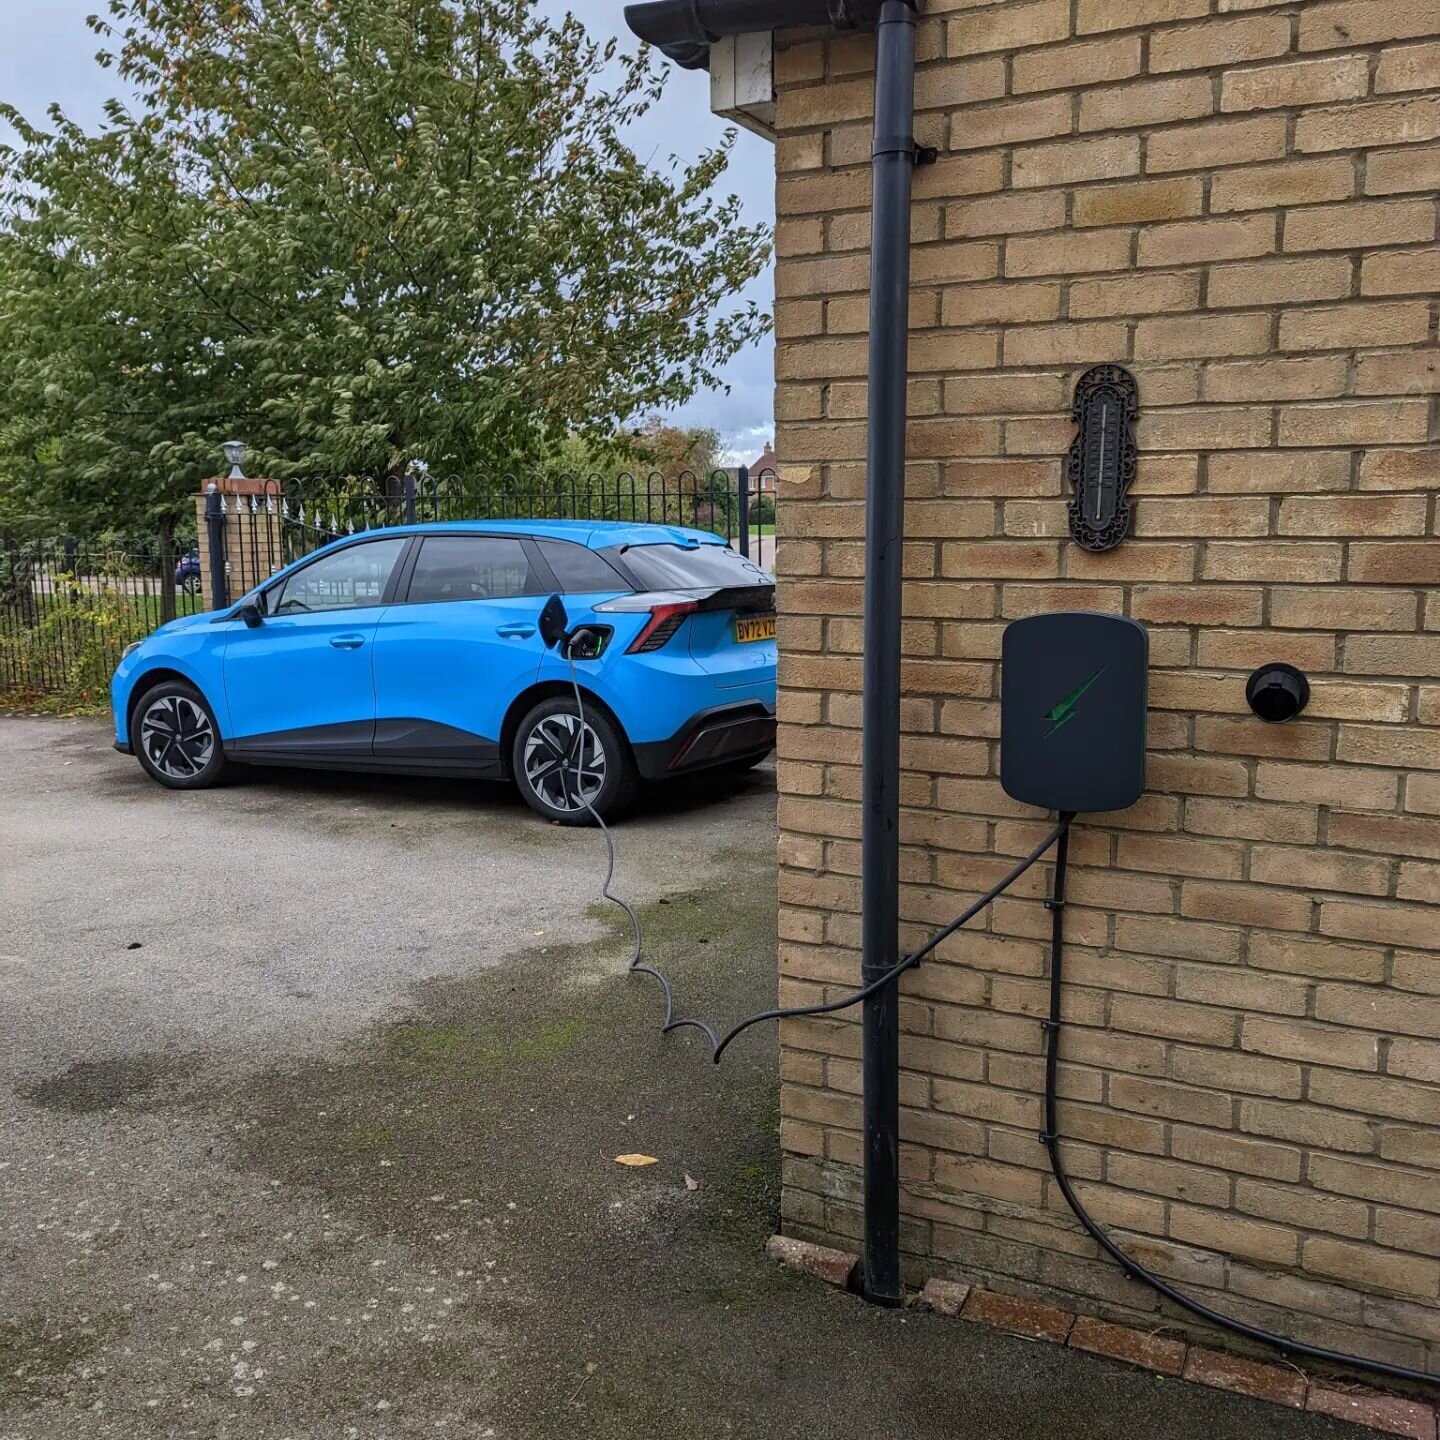 Space Grey @hypervoltuk installation today in Bedfordshire. #evcharger #electriccar #mg4